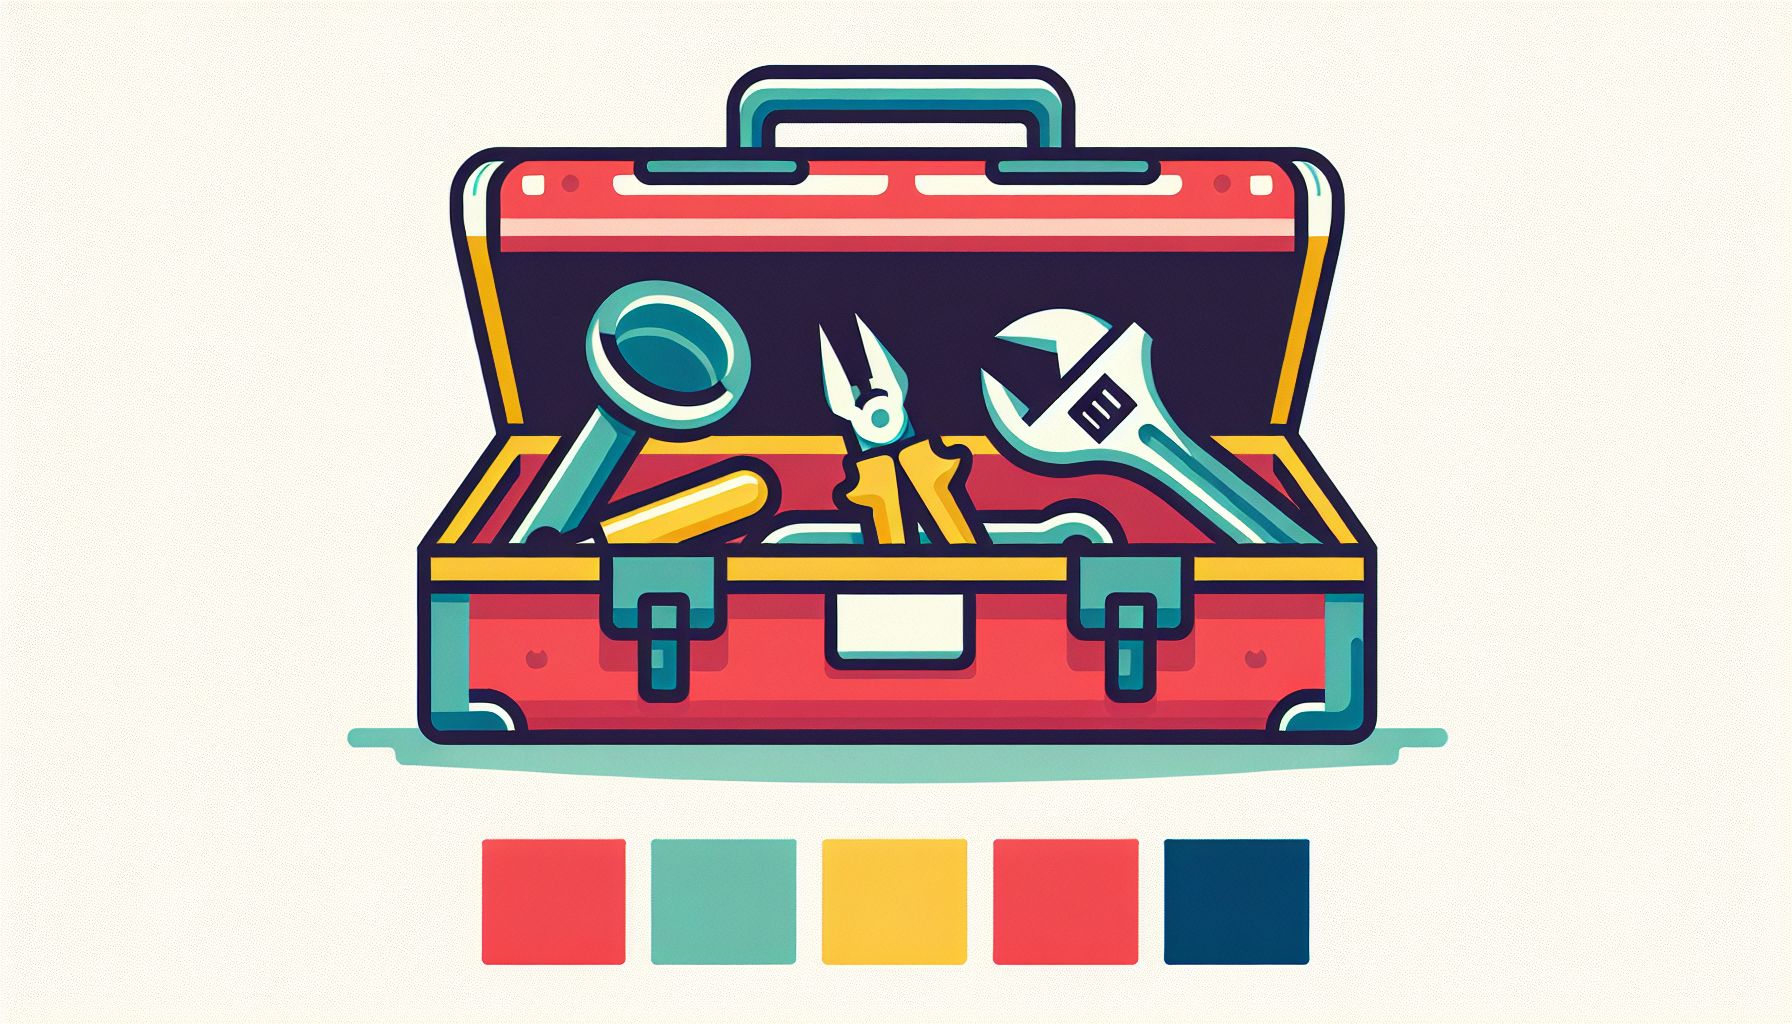 Toolbox in flat illustration style and white background, red #f47574, green #88c7a8, yellow #fcc44b, and blue #645bc8 colors.